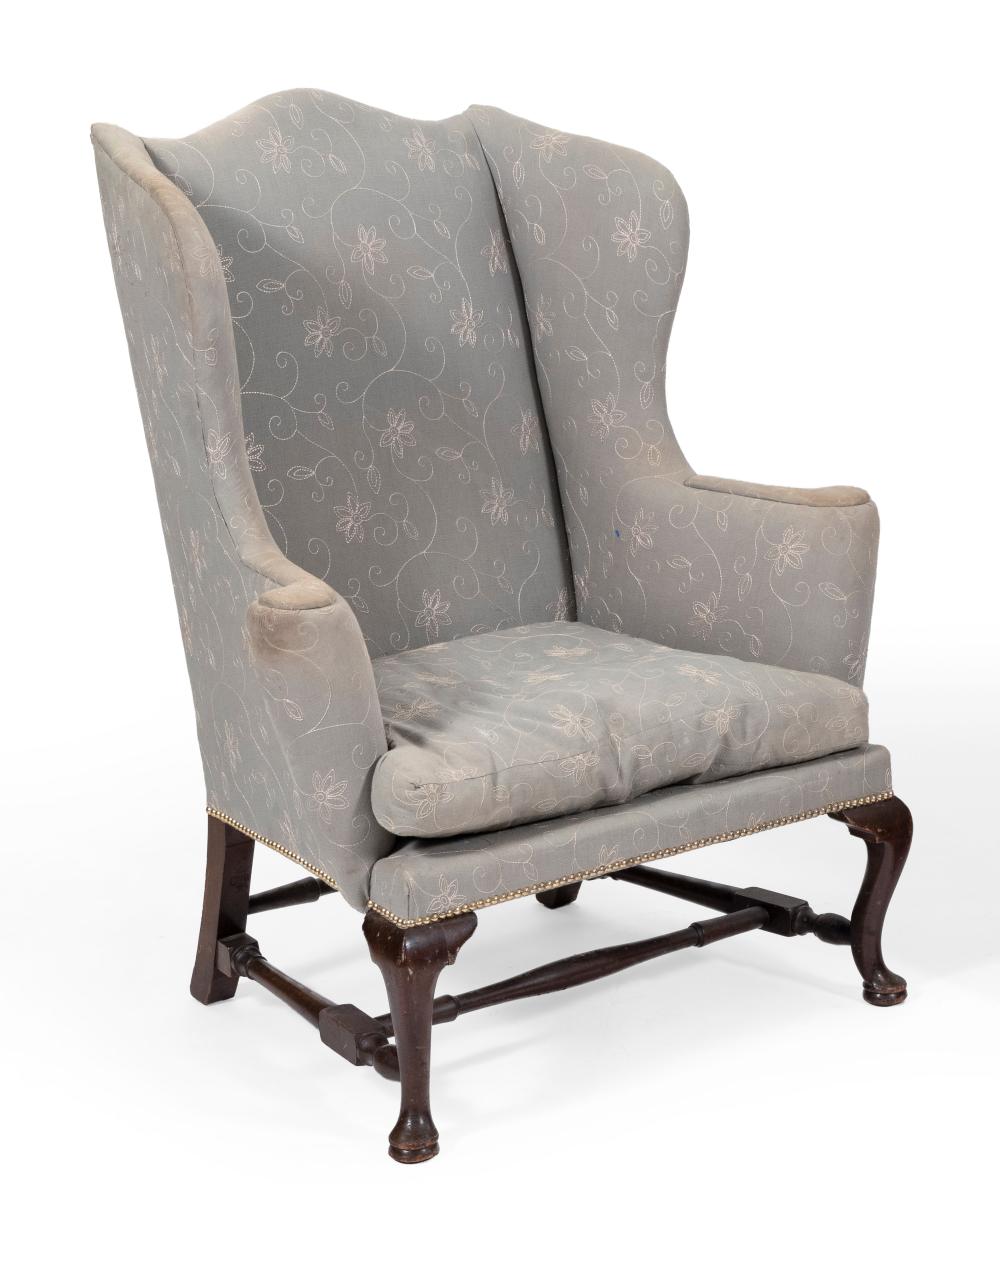 QUEEN ANNE STYLE WING CHAIR MAHOGANY 34be6d